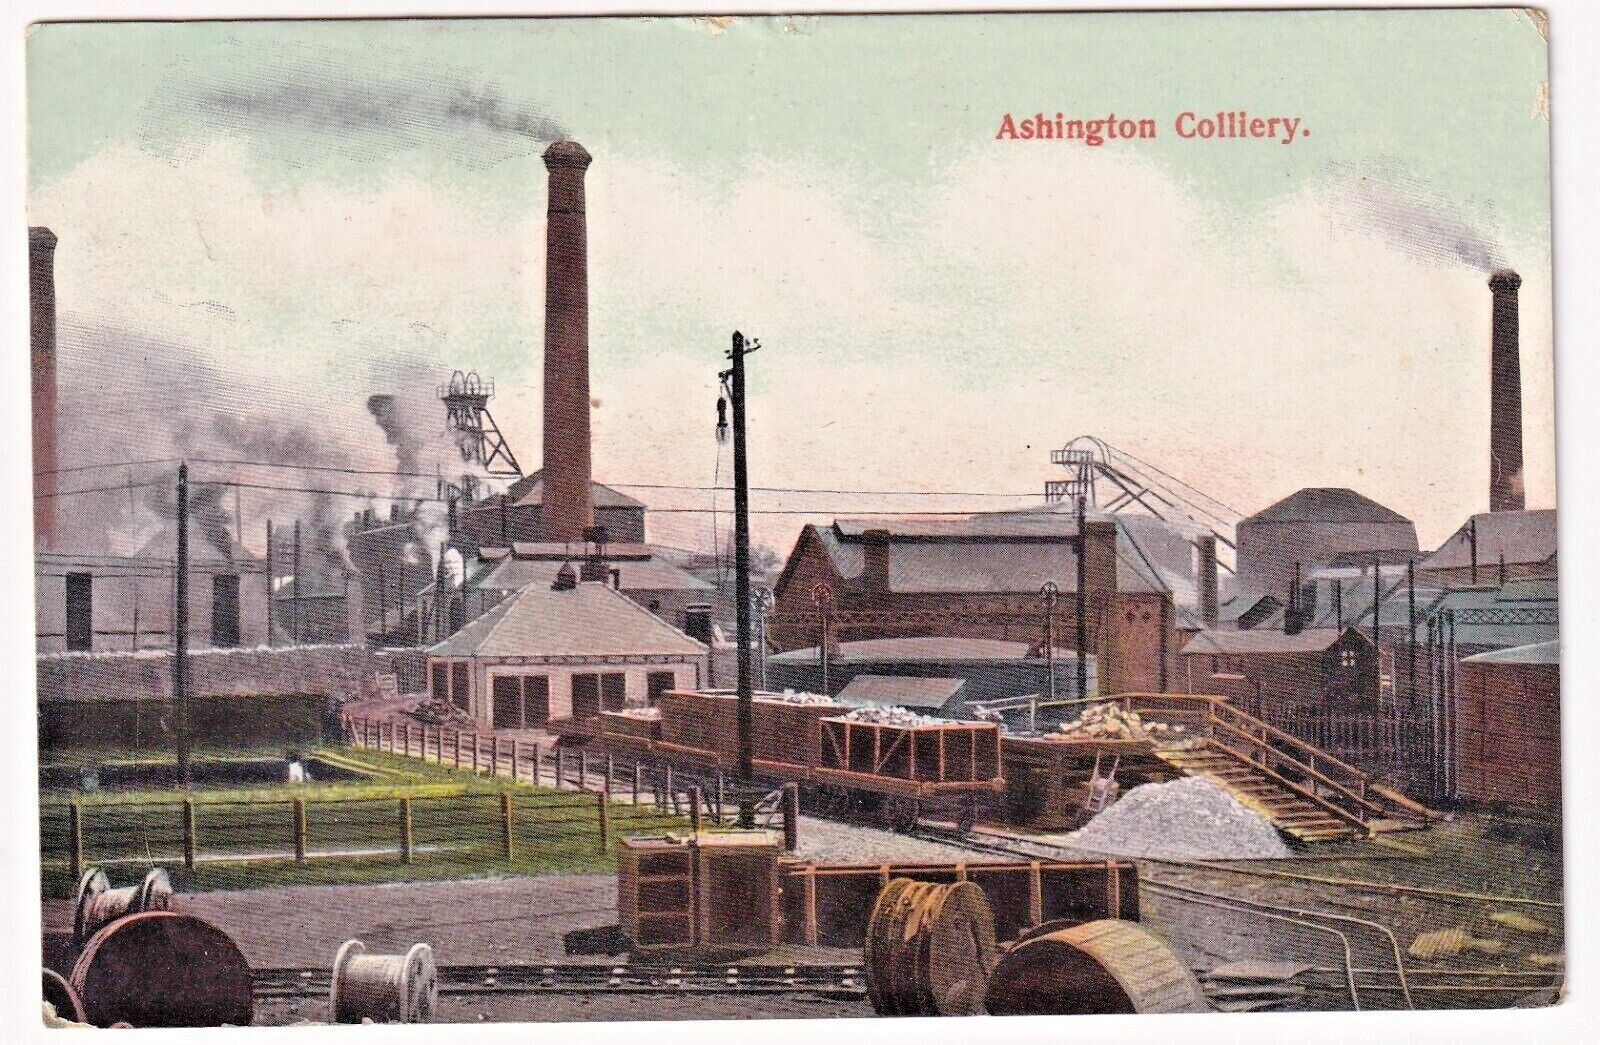 House Clearance - Ashington Colliery Morpeth Durham  Printed Service  Posted June 19th 1909